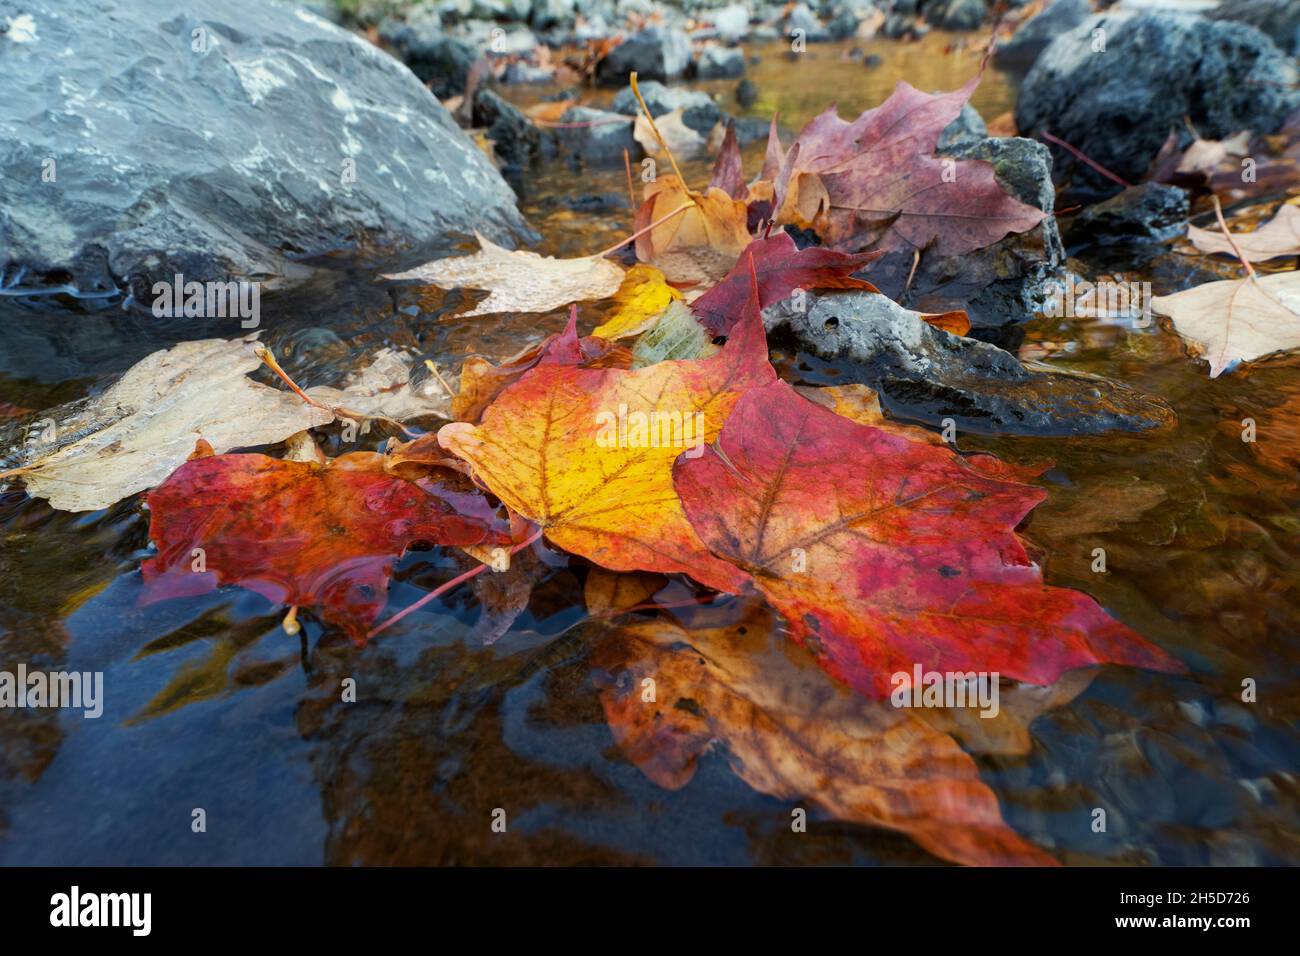 Autumn, Fall  Leaves floating on water, Fall Colors, Maple Leaves Stock Photo